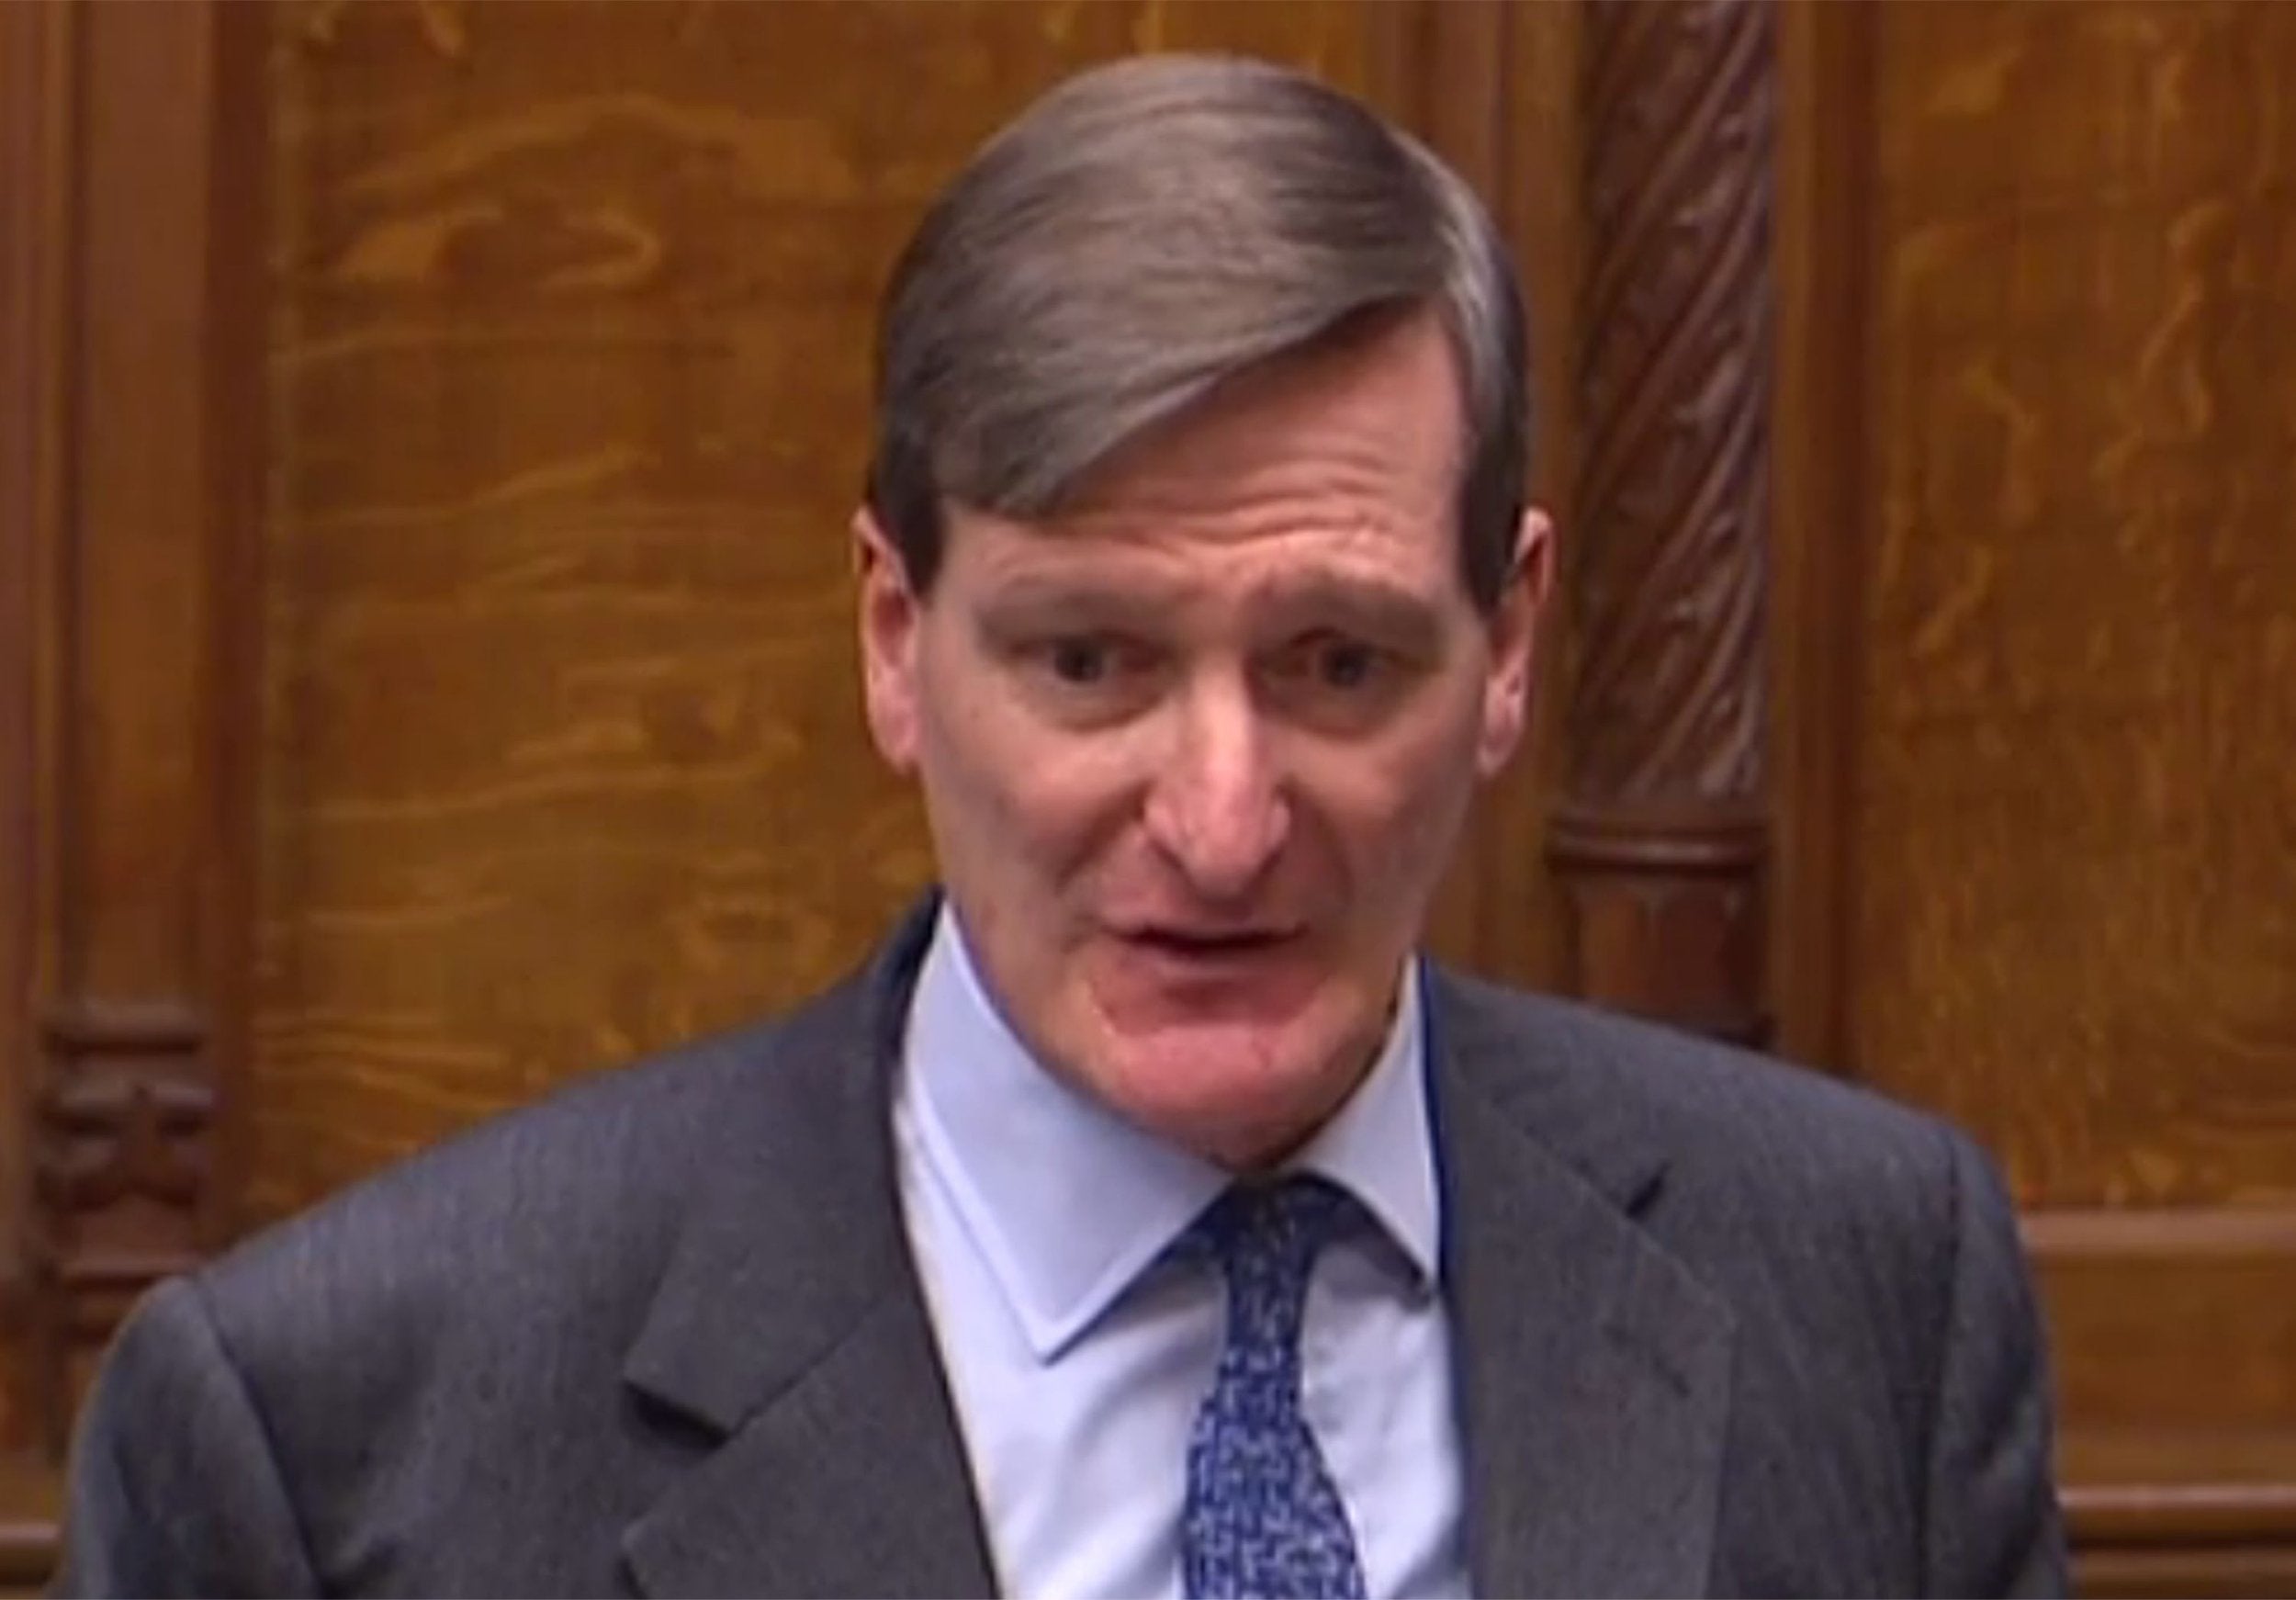 Brexit: Tory MP Dominic Grieve blasts Theresa May's attack on parliament for blocking her deal – 'I'm ashamed to be a Conservative'